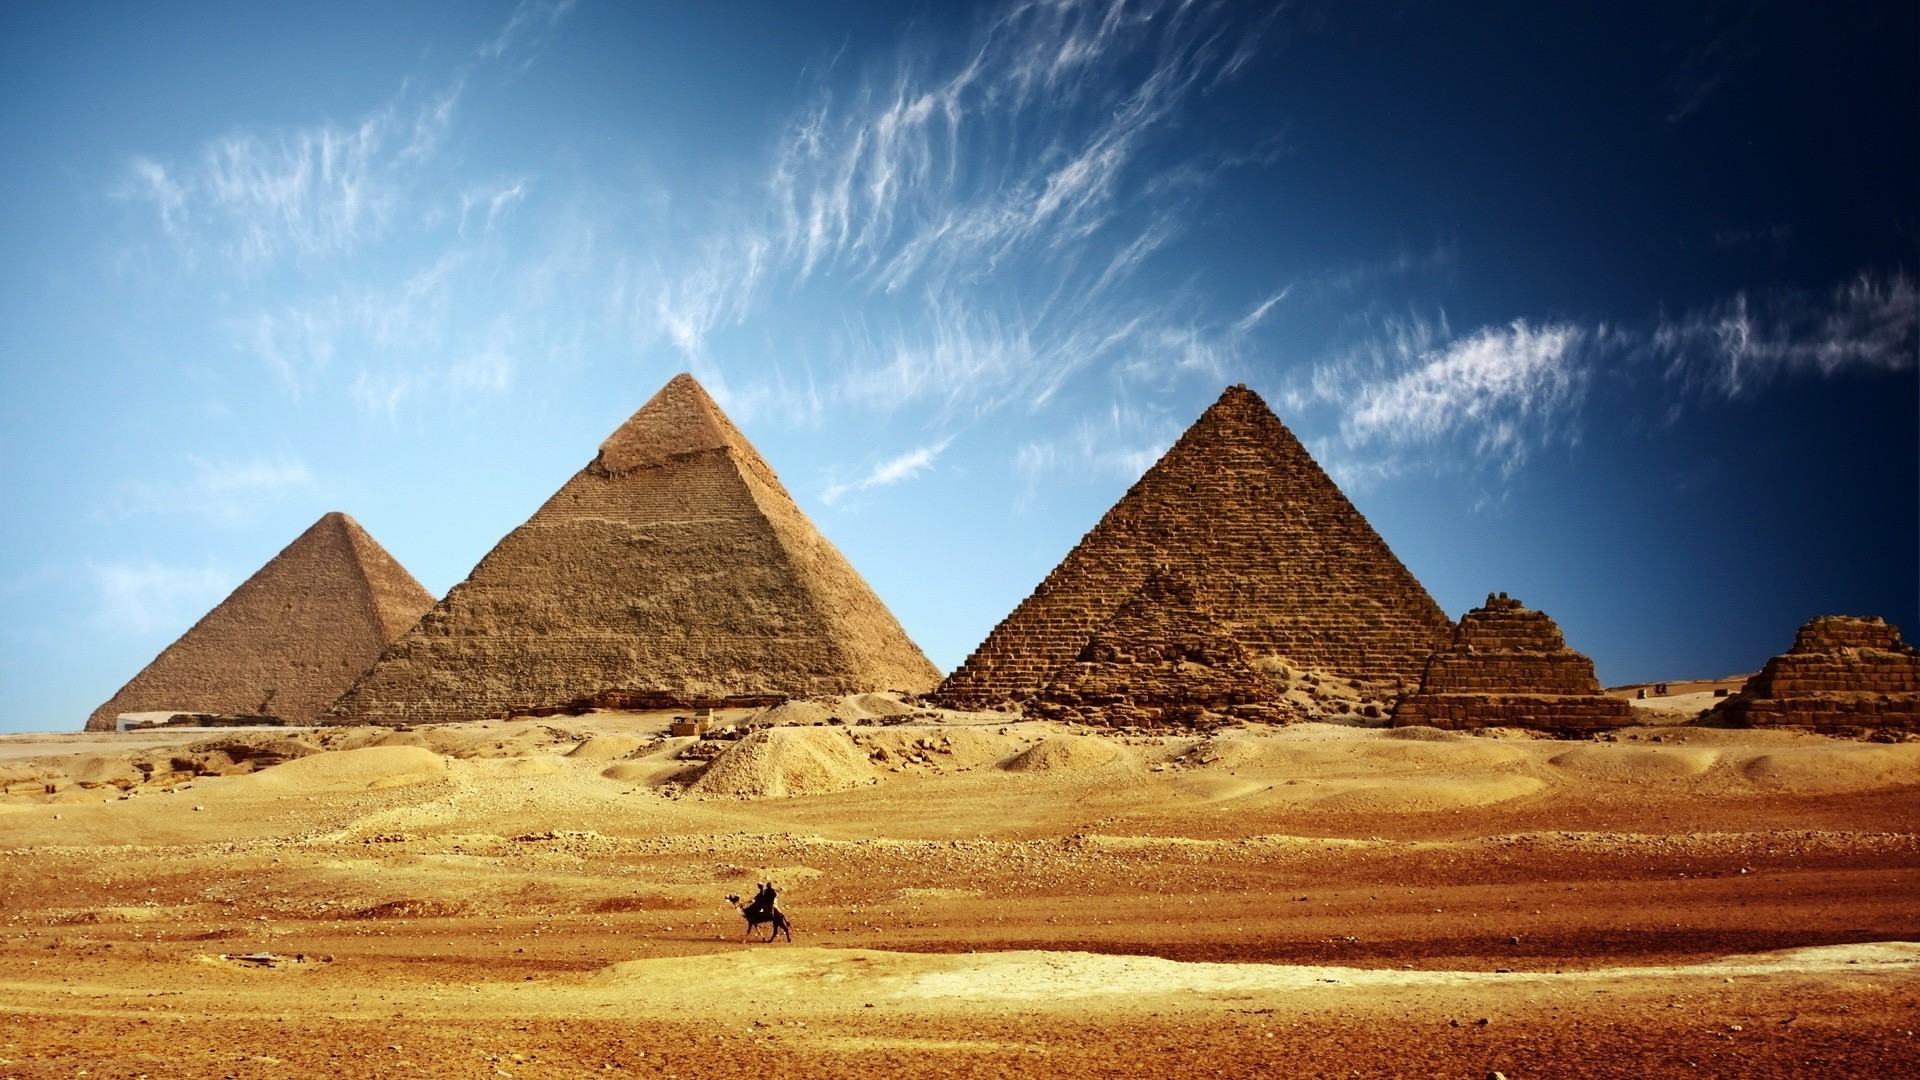 famous places pyramid desert travel grave archaeology sand pharaoh camel sky ancient outdoors dry sphinx hot sun tourism